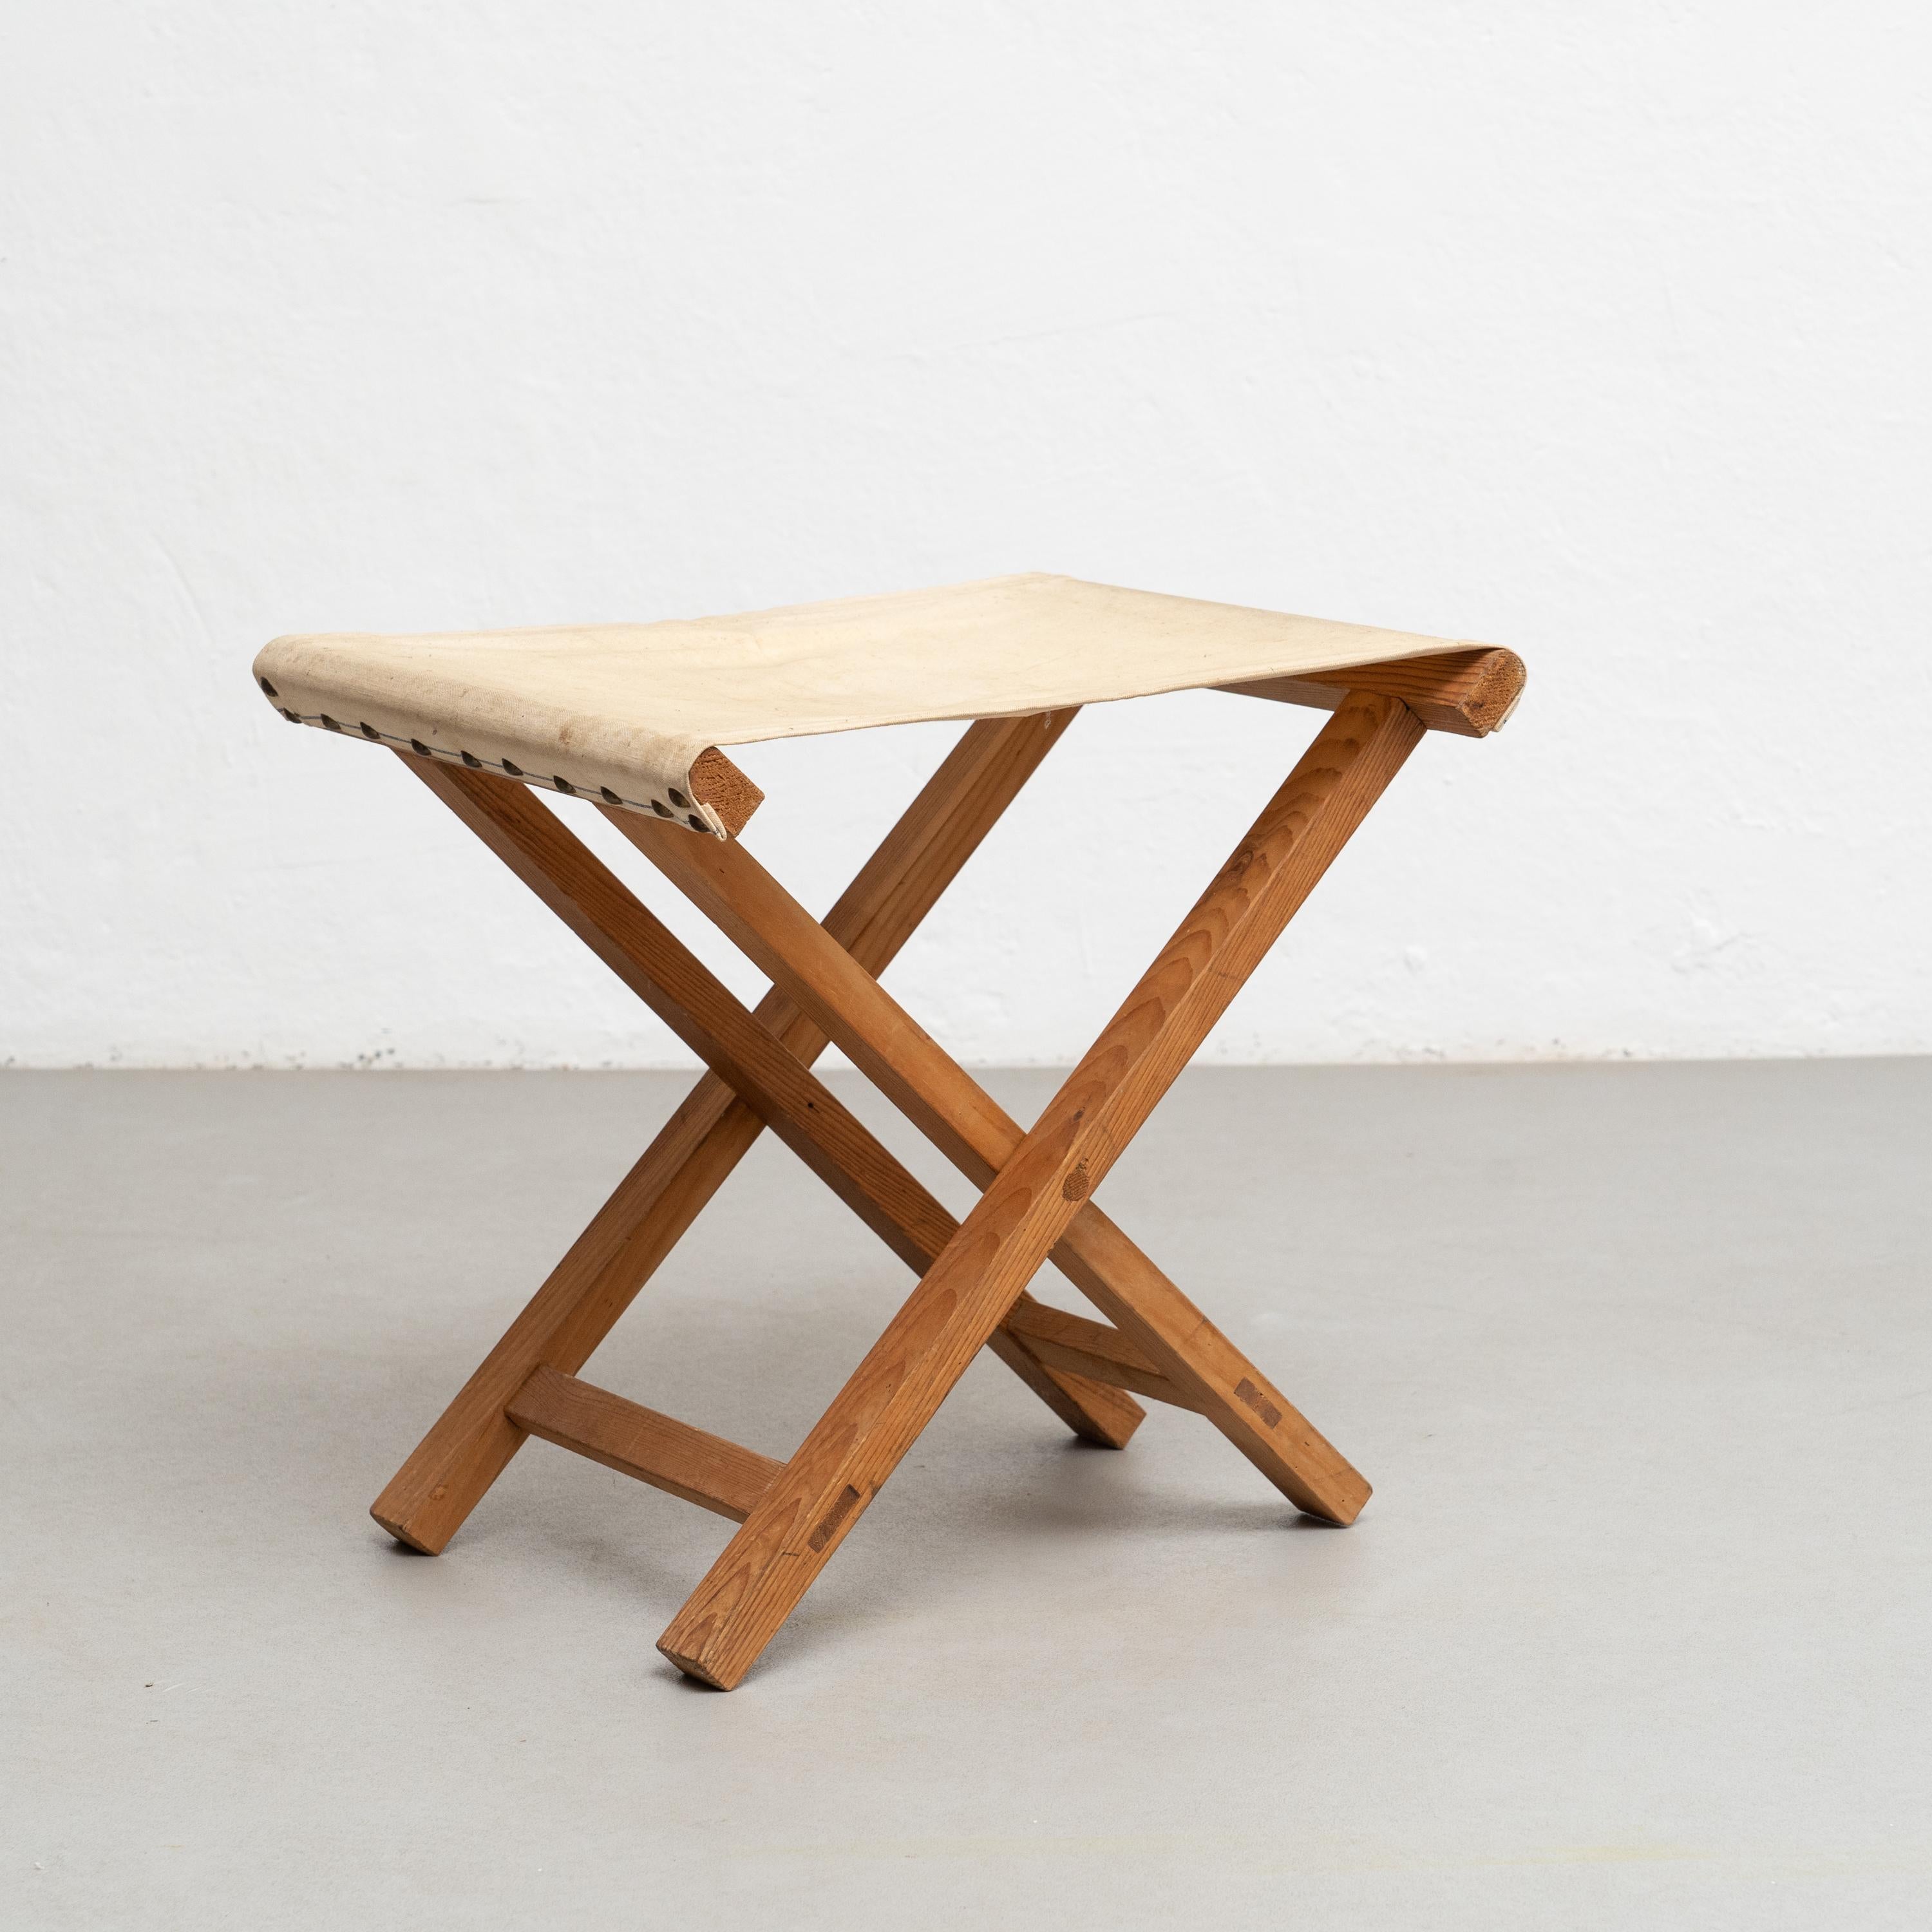 Folding wood and Fabric Stool, circa 1960.

By unknown artisan in Spain, circa 1960.

In good original condition, with minor wear consistent with age and use, preserving a beautiful patina.

Materials:
Wood.
Fabric.